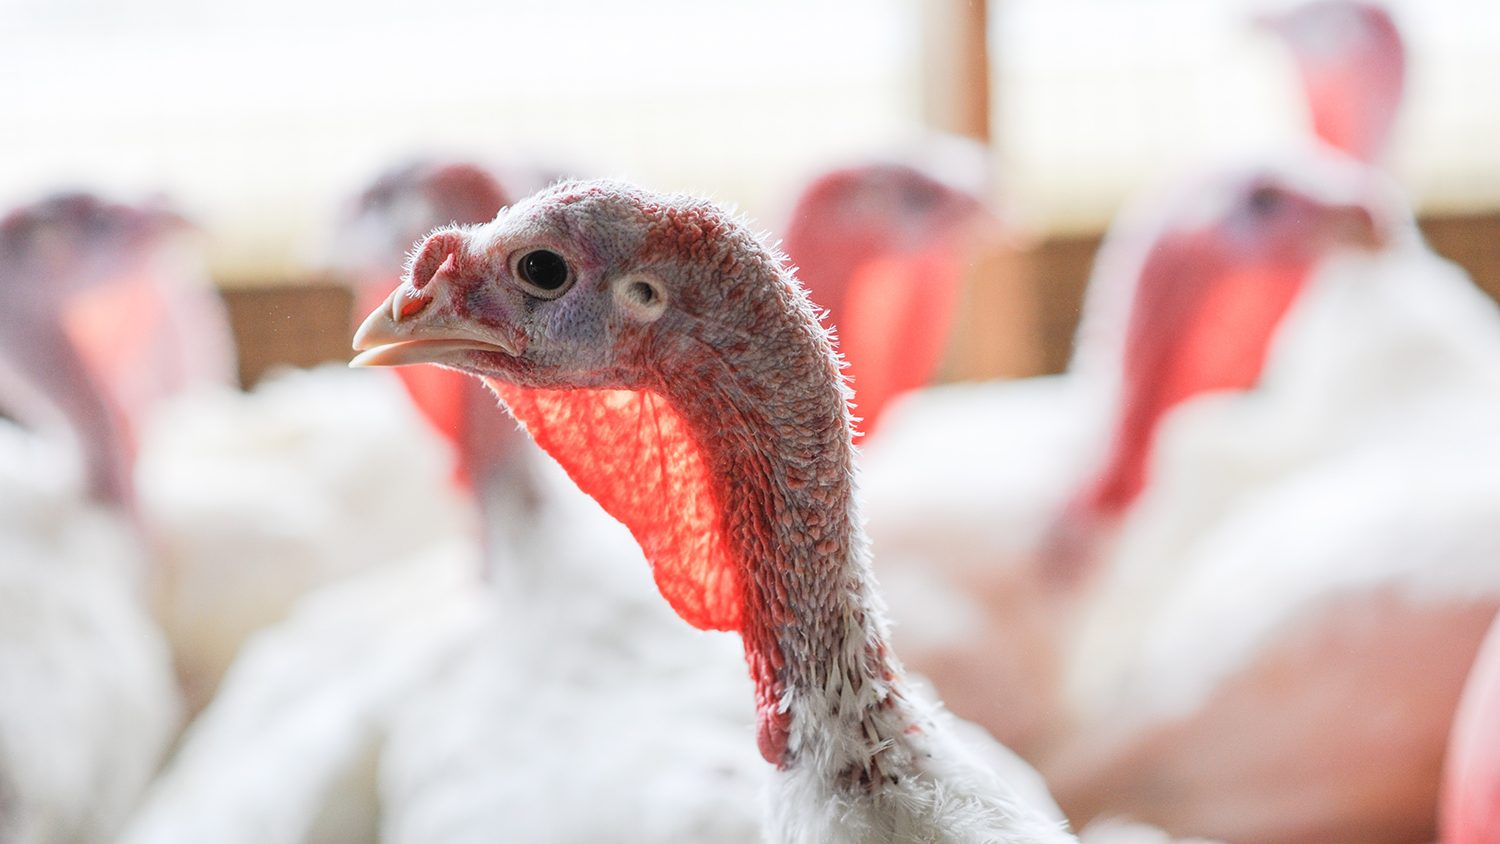 Close shot of a turkey in poulty building with white feathers.